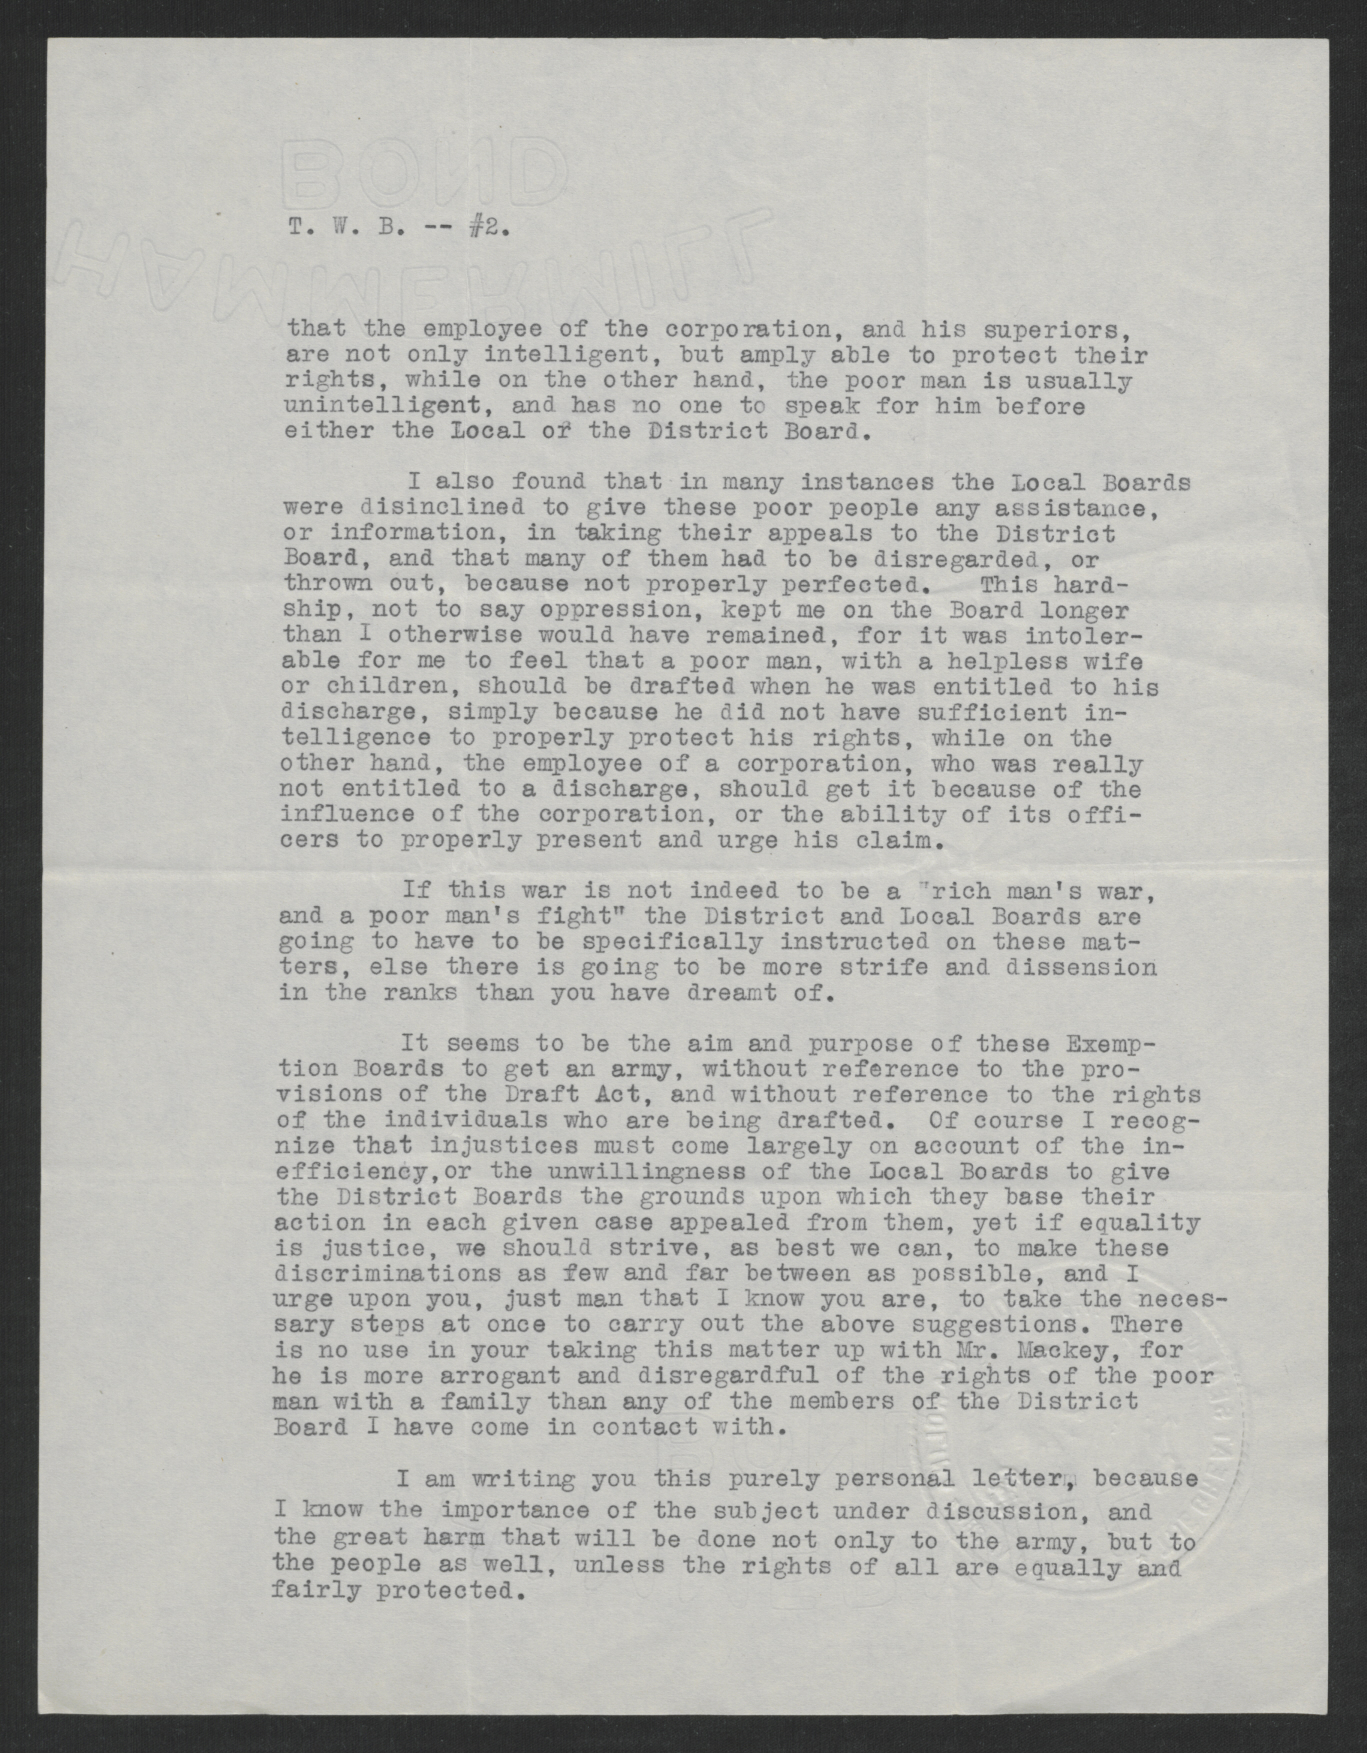 Letter from Edwin T. Cansler to Thomas W. Bickett, September 26, 1917, page 2